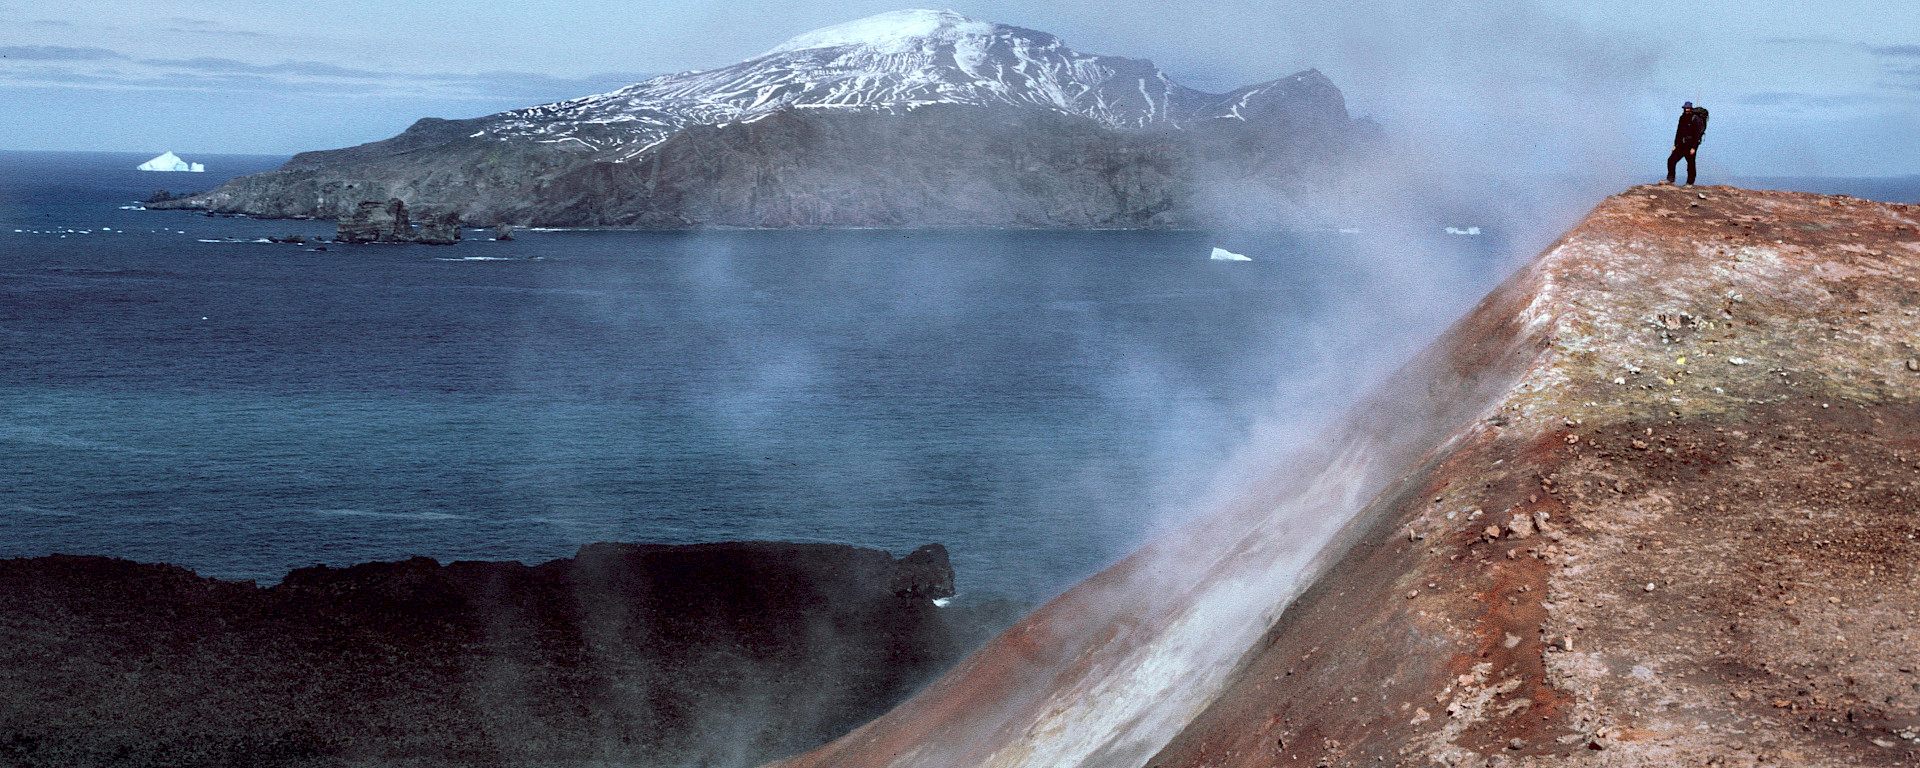 A man stands in a cloud of volcanic steam in the Antarctic South Sandwich Islands